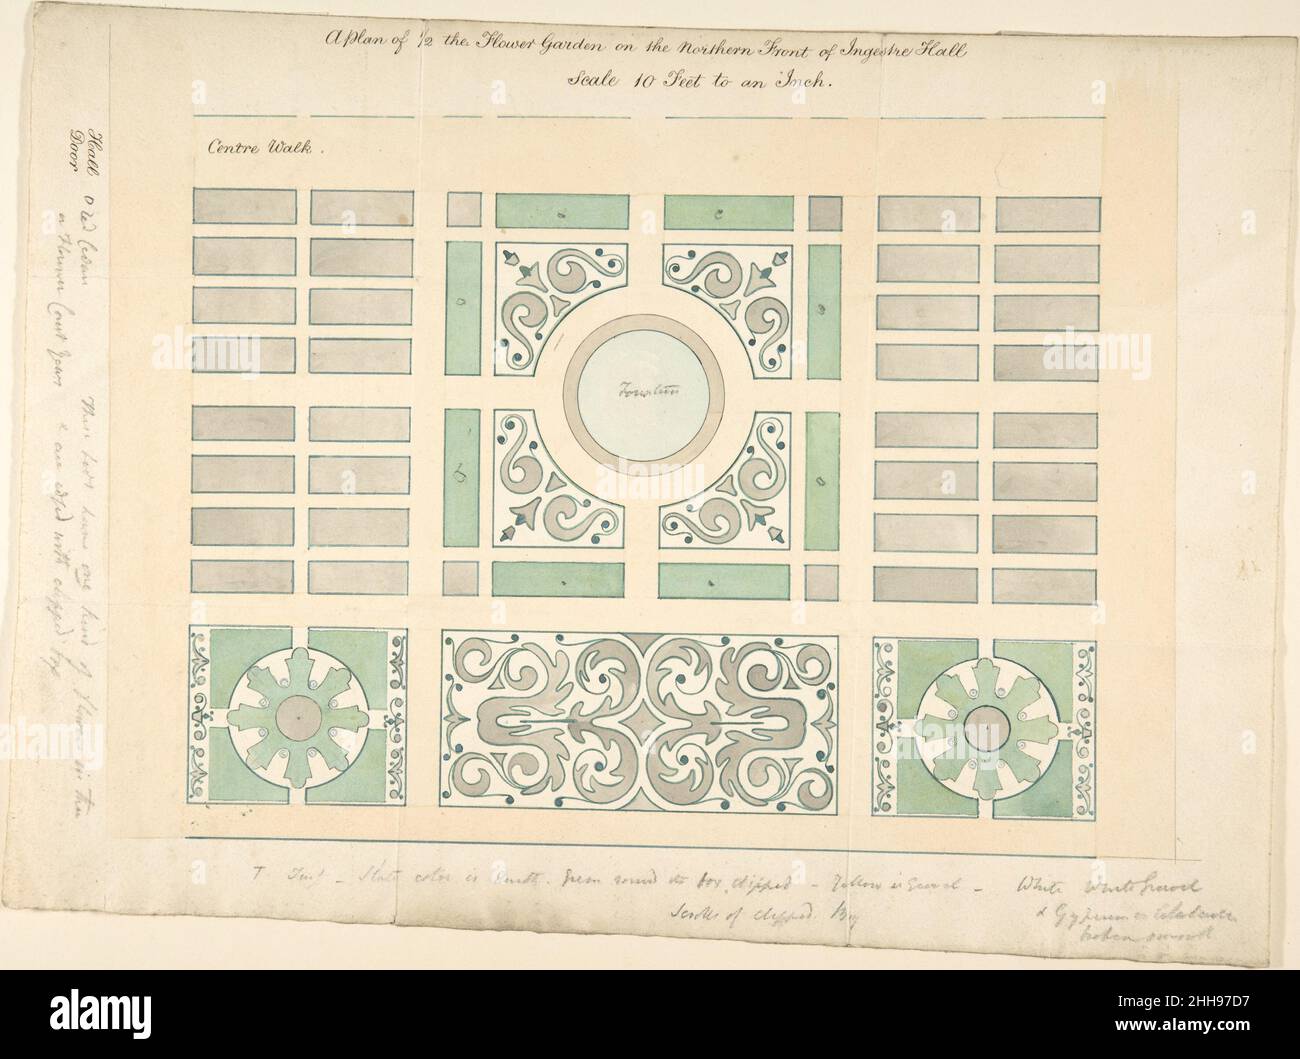 Plan of the Flower Garden on the Northern Front, Ingestre Hall, Staffordshire 1836 Sir Charles Chetwynd, 2nd Earl Talbot British. Plan of the Flower Garden on the Northern Front, Ingestre Hall, Staffordshire. Sir Charles Chetwynd, 2nd Earl Talbot (British, 1777–1849). 1836. Pen and colored washes Stock Photo